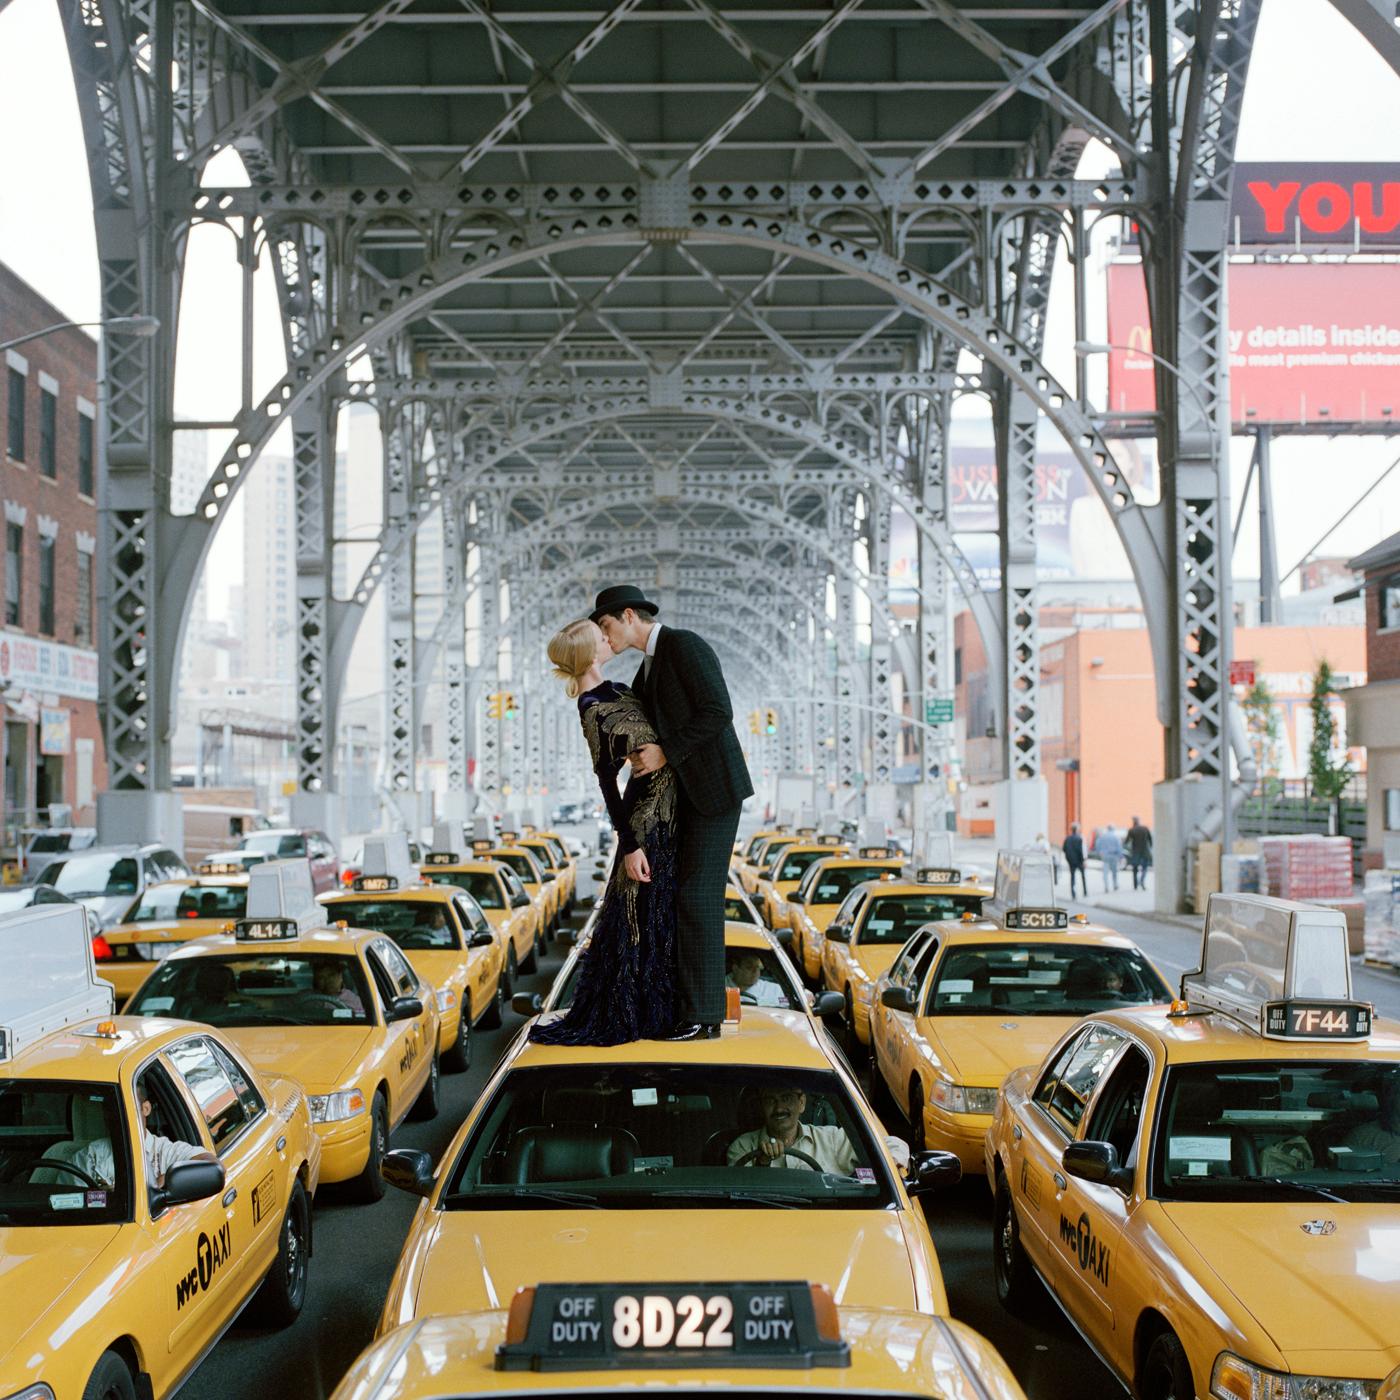 Rodney Smith Color Photograph - Edythe and Andrew Kissing on Taxis, NYC - 58 x 58 inches